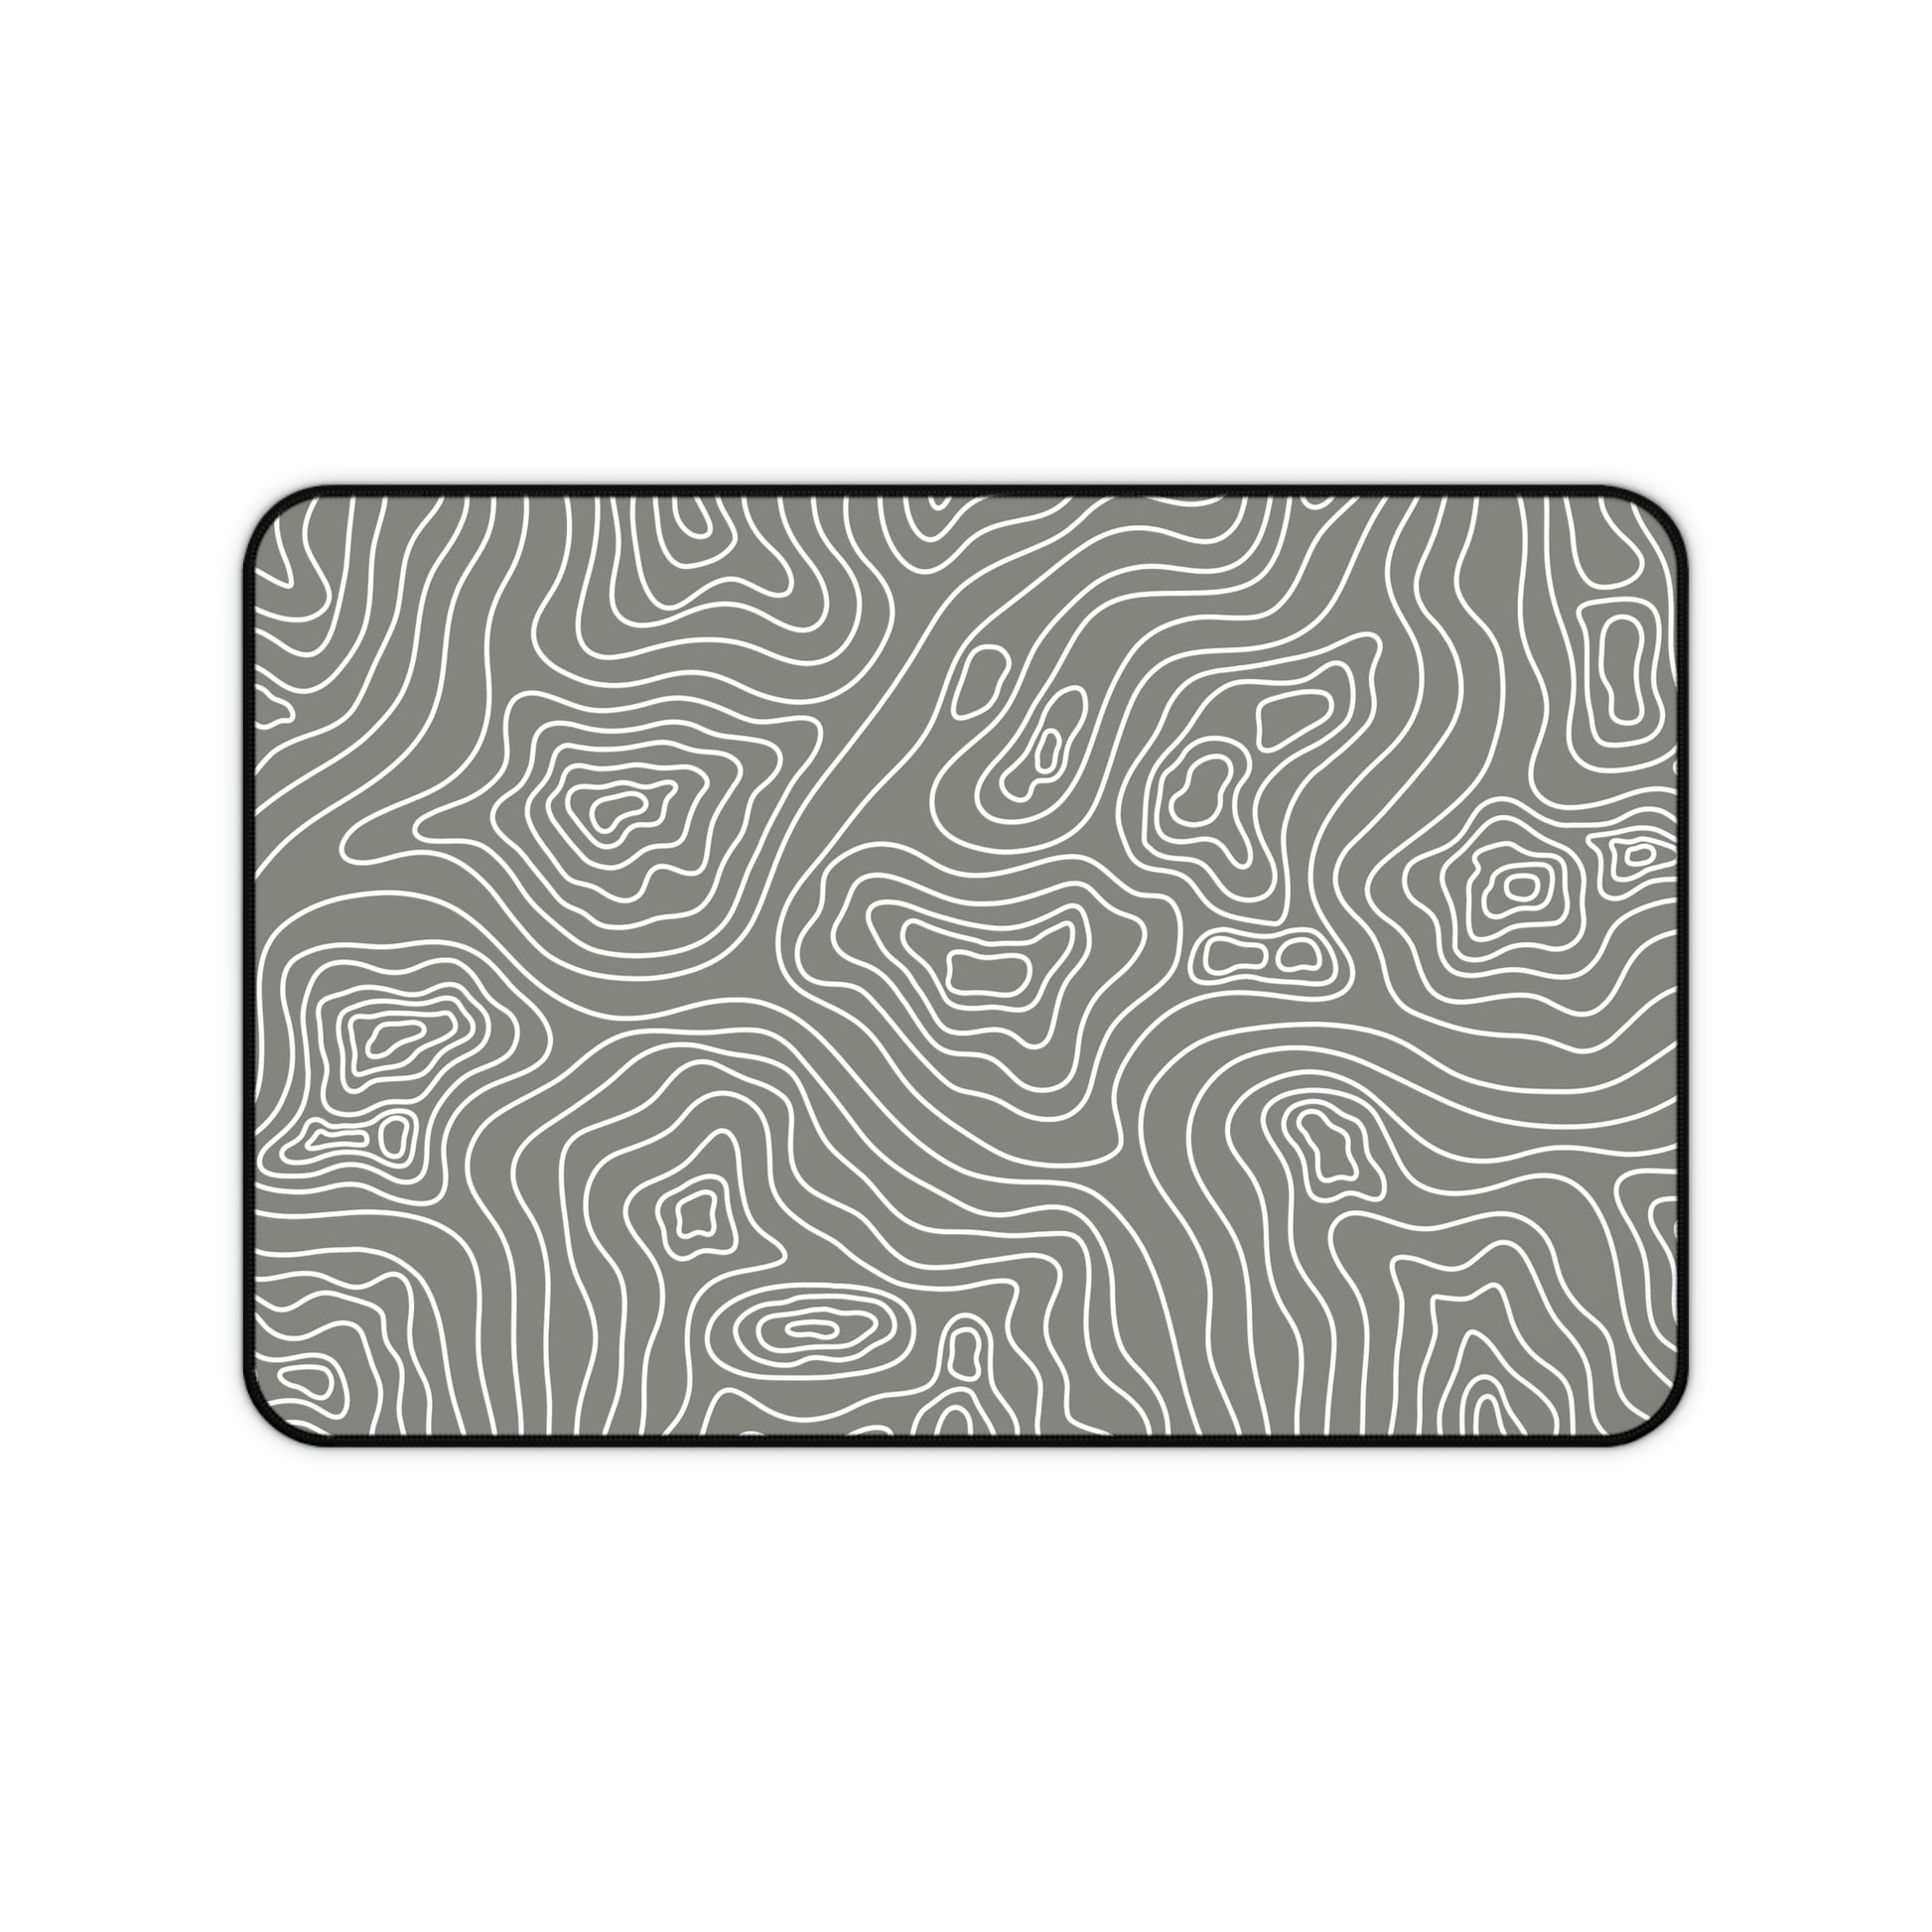 A 12" x 18" gray desk mat with white topographic lines.